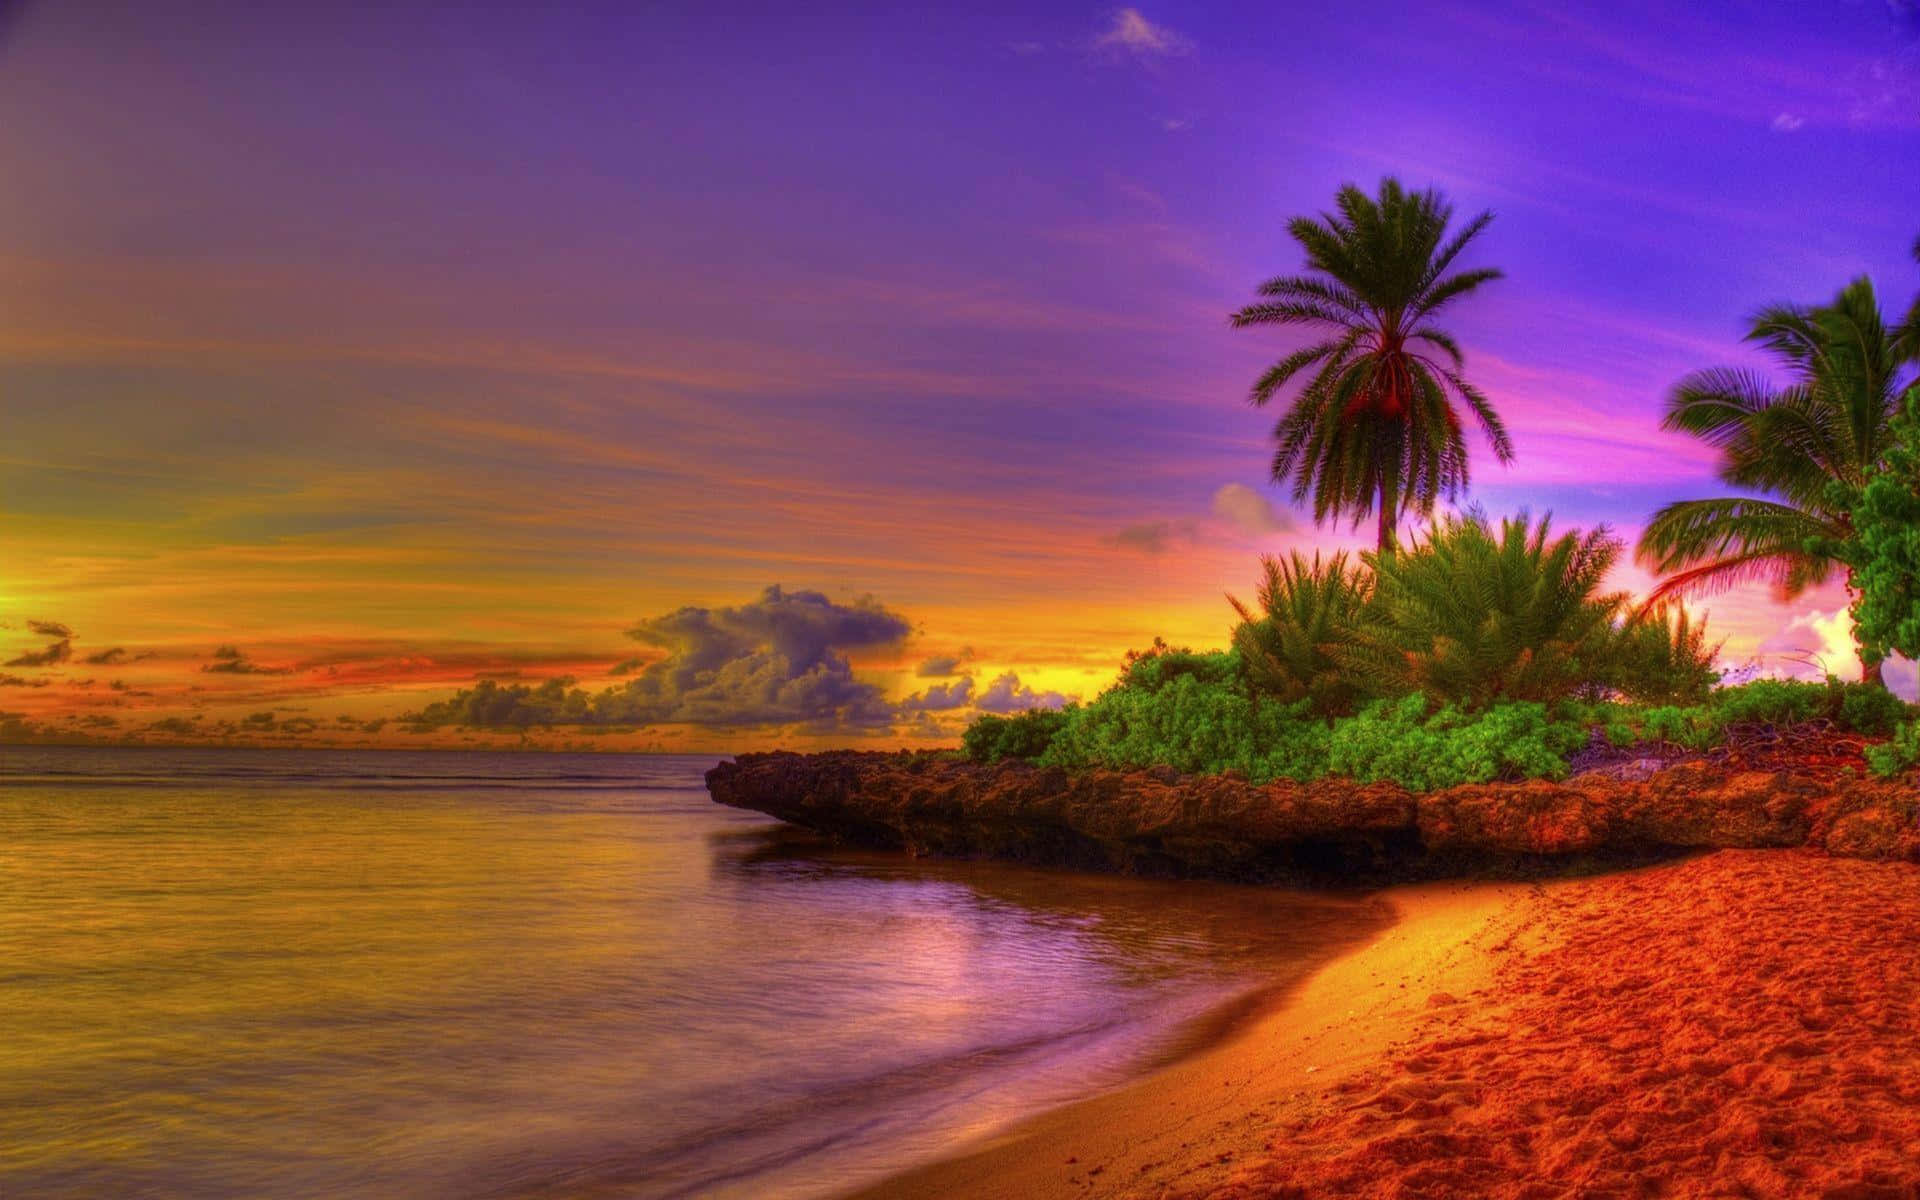 A Colorful Sunset On A Beach With Palm Trees